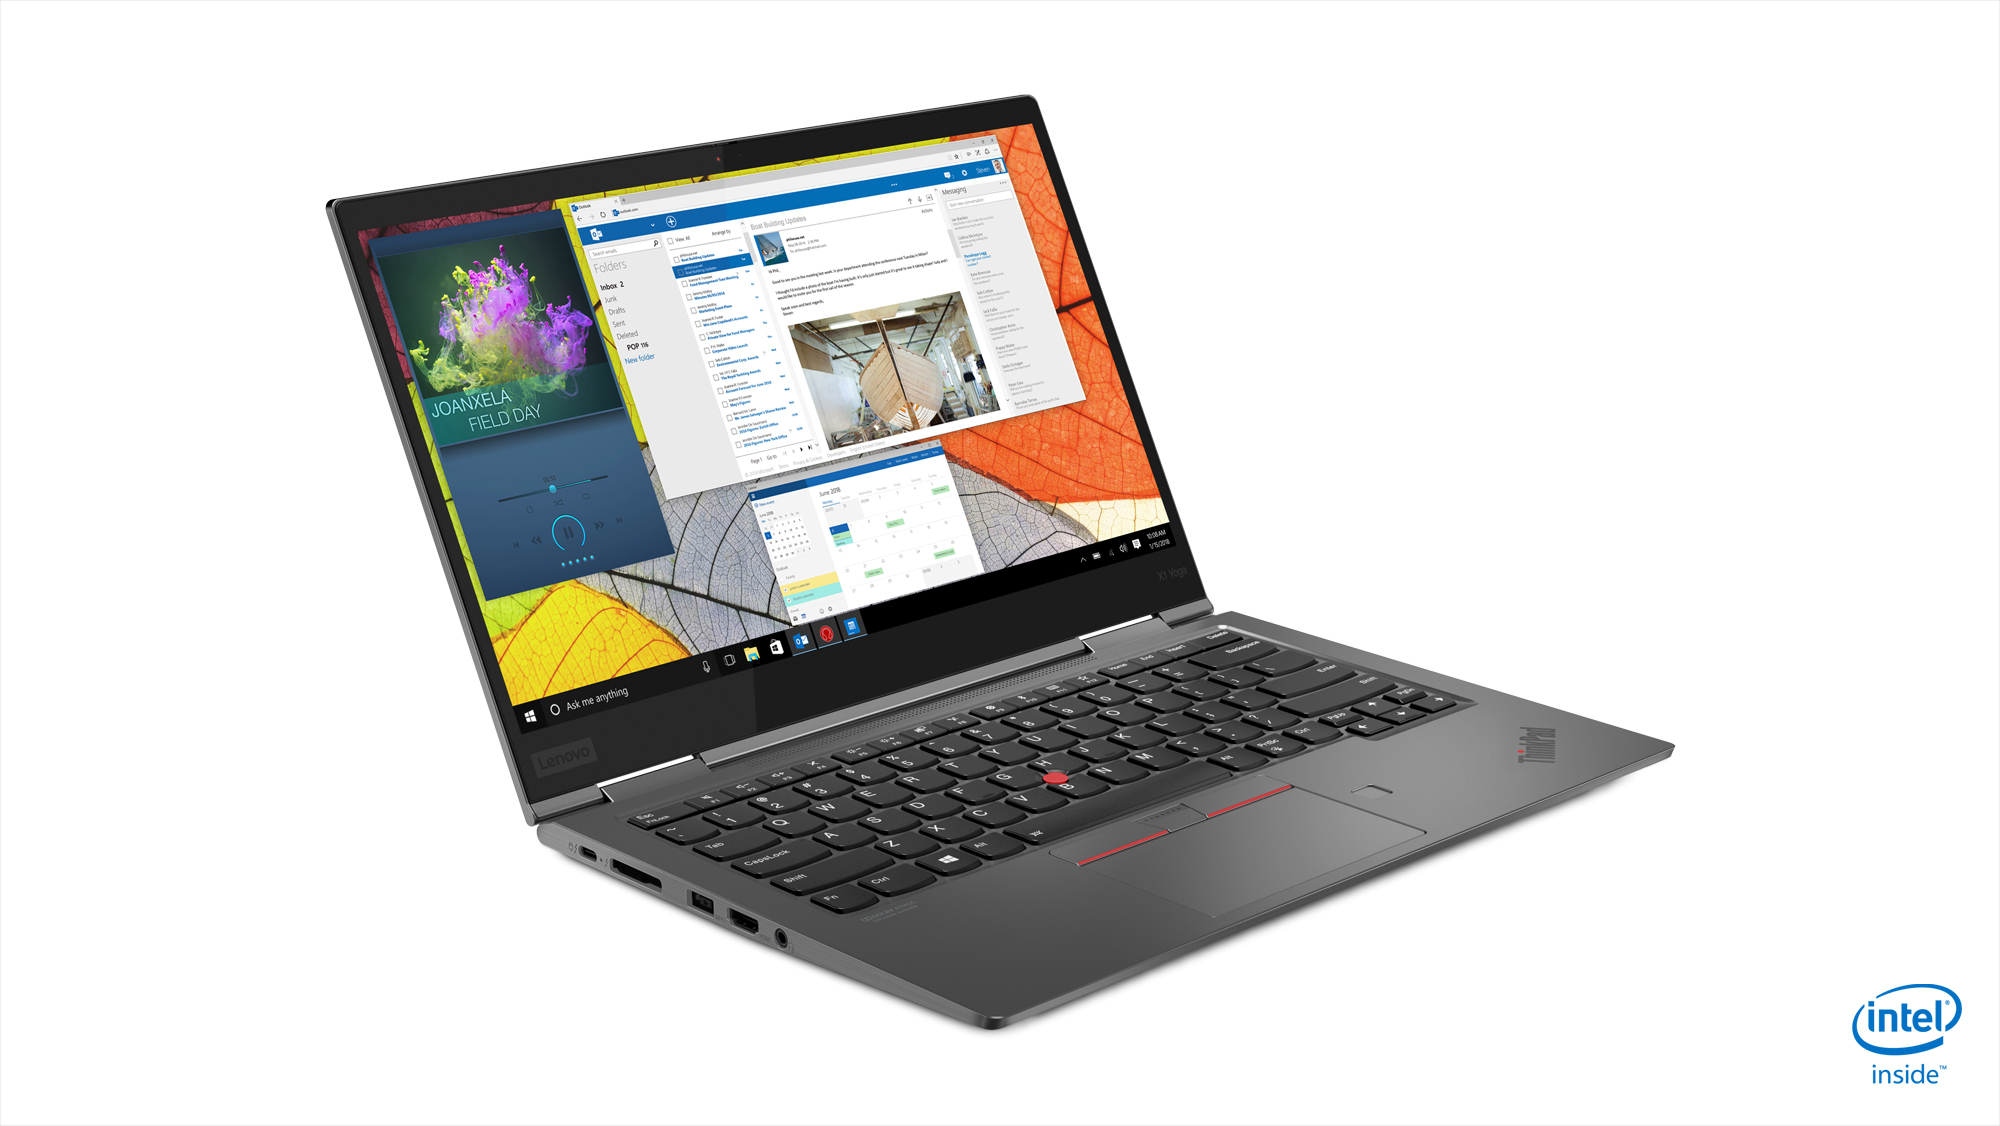 lenovo updated thinkpad x1 carbon yoga ces 2019 06 hero front facing right